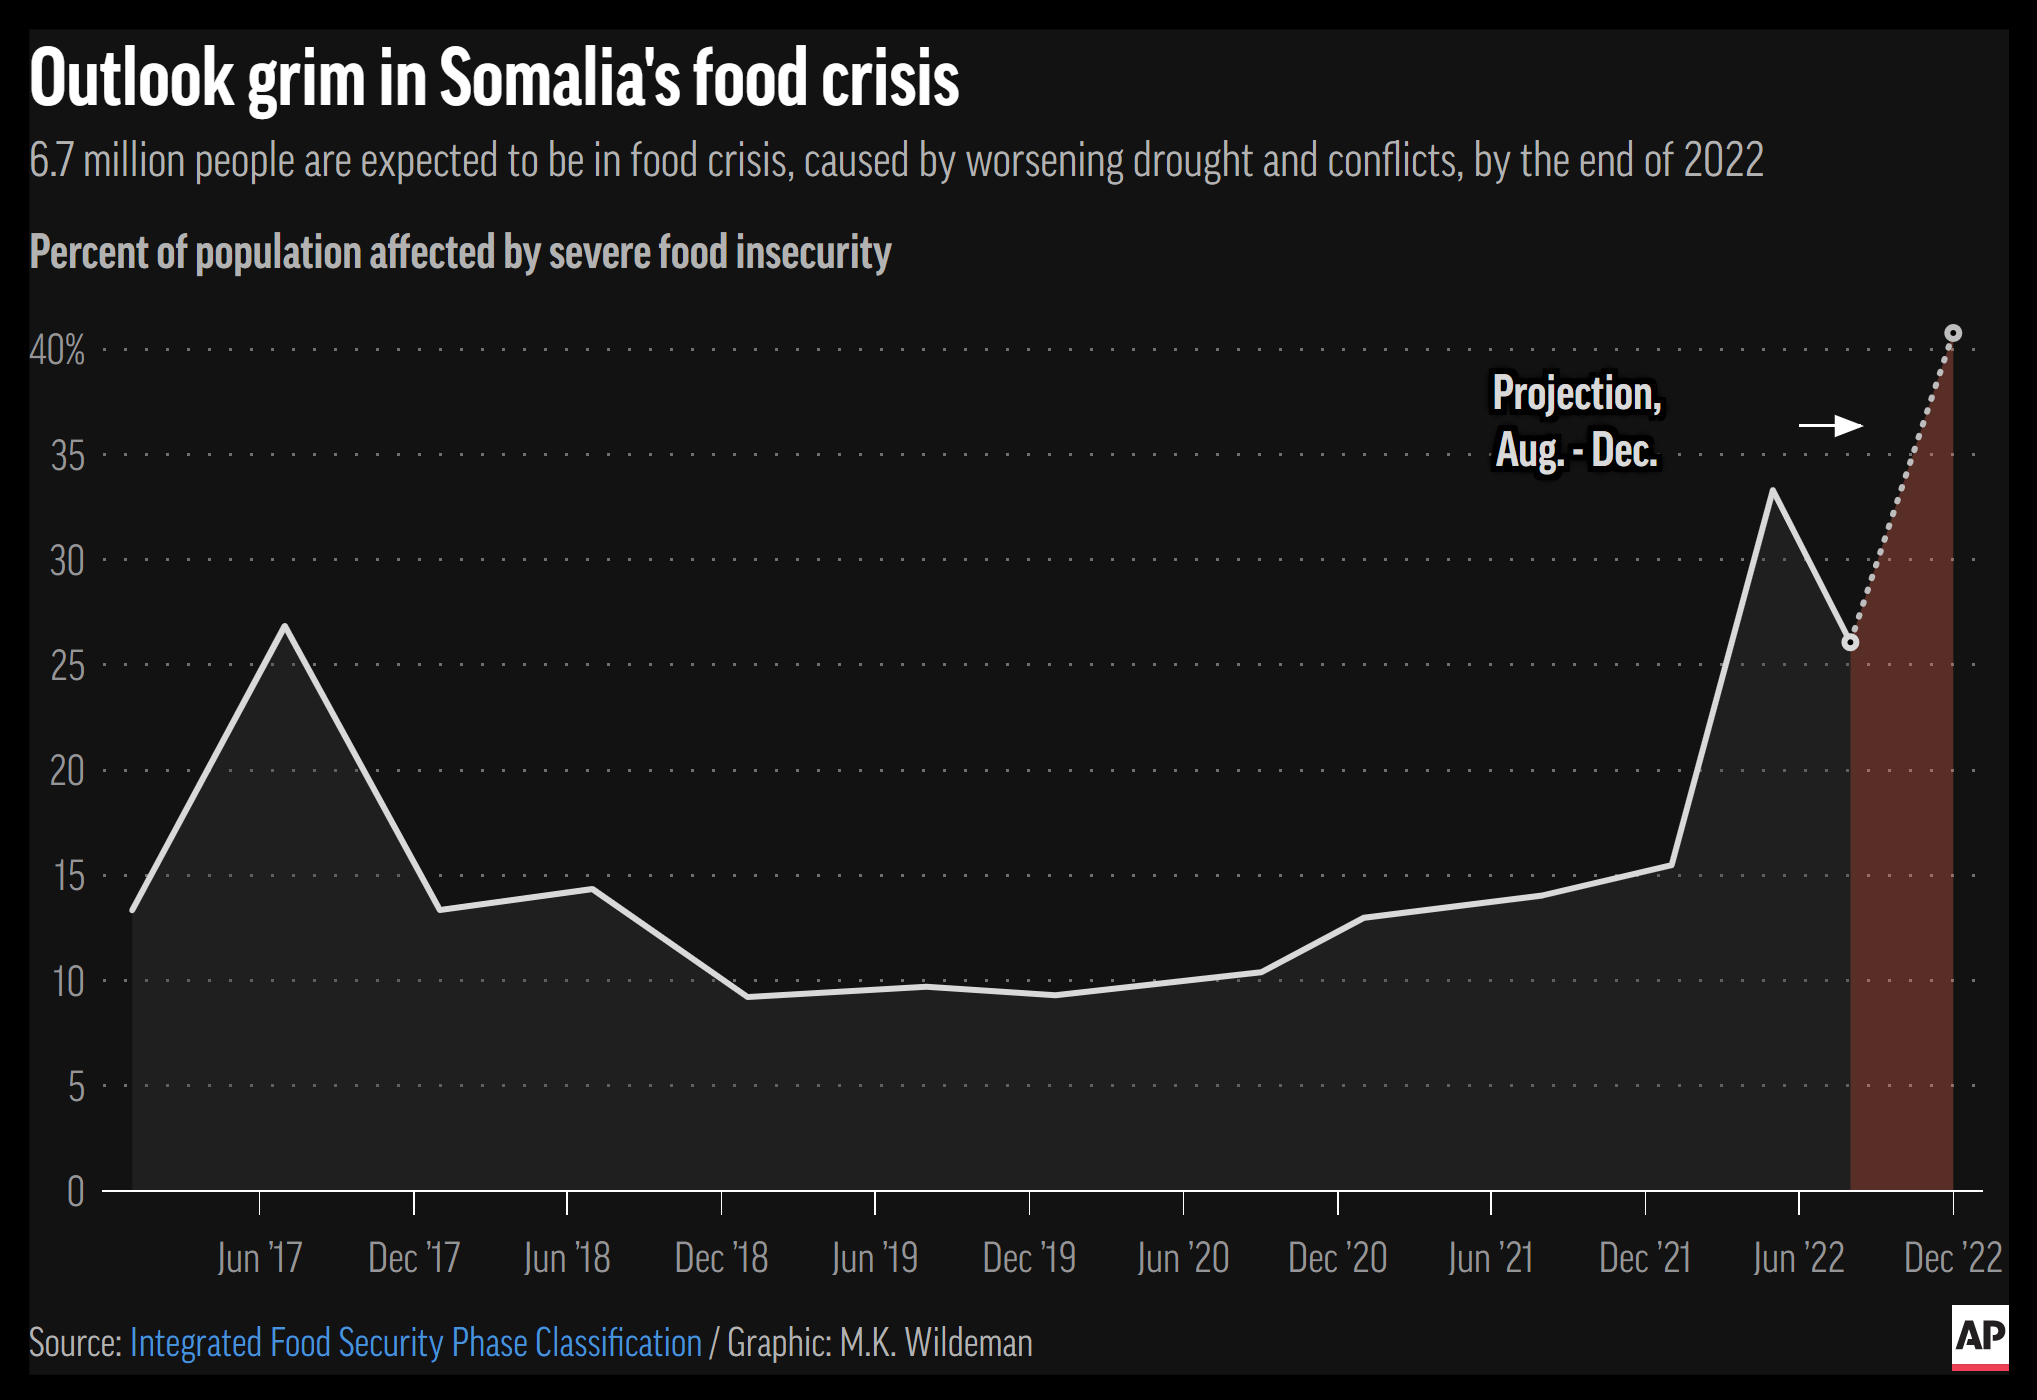 Percent of Somalia population affected by severe food insecurity, 2017-2022. 6.7 million people were expected to be in food crisis, caused by worsening drought and conflicts, by the end of 2022. Data: Integrated Food Security Phase Classification. Graphic: M.K. Wildeman / AP News